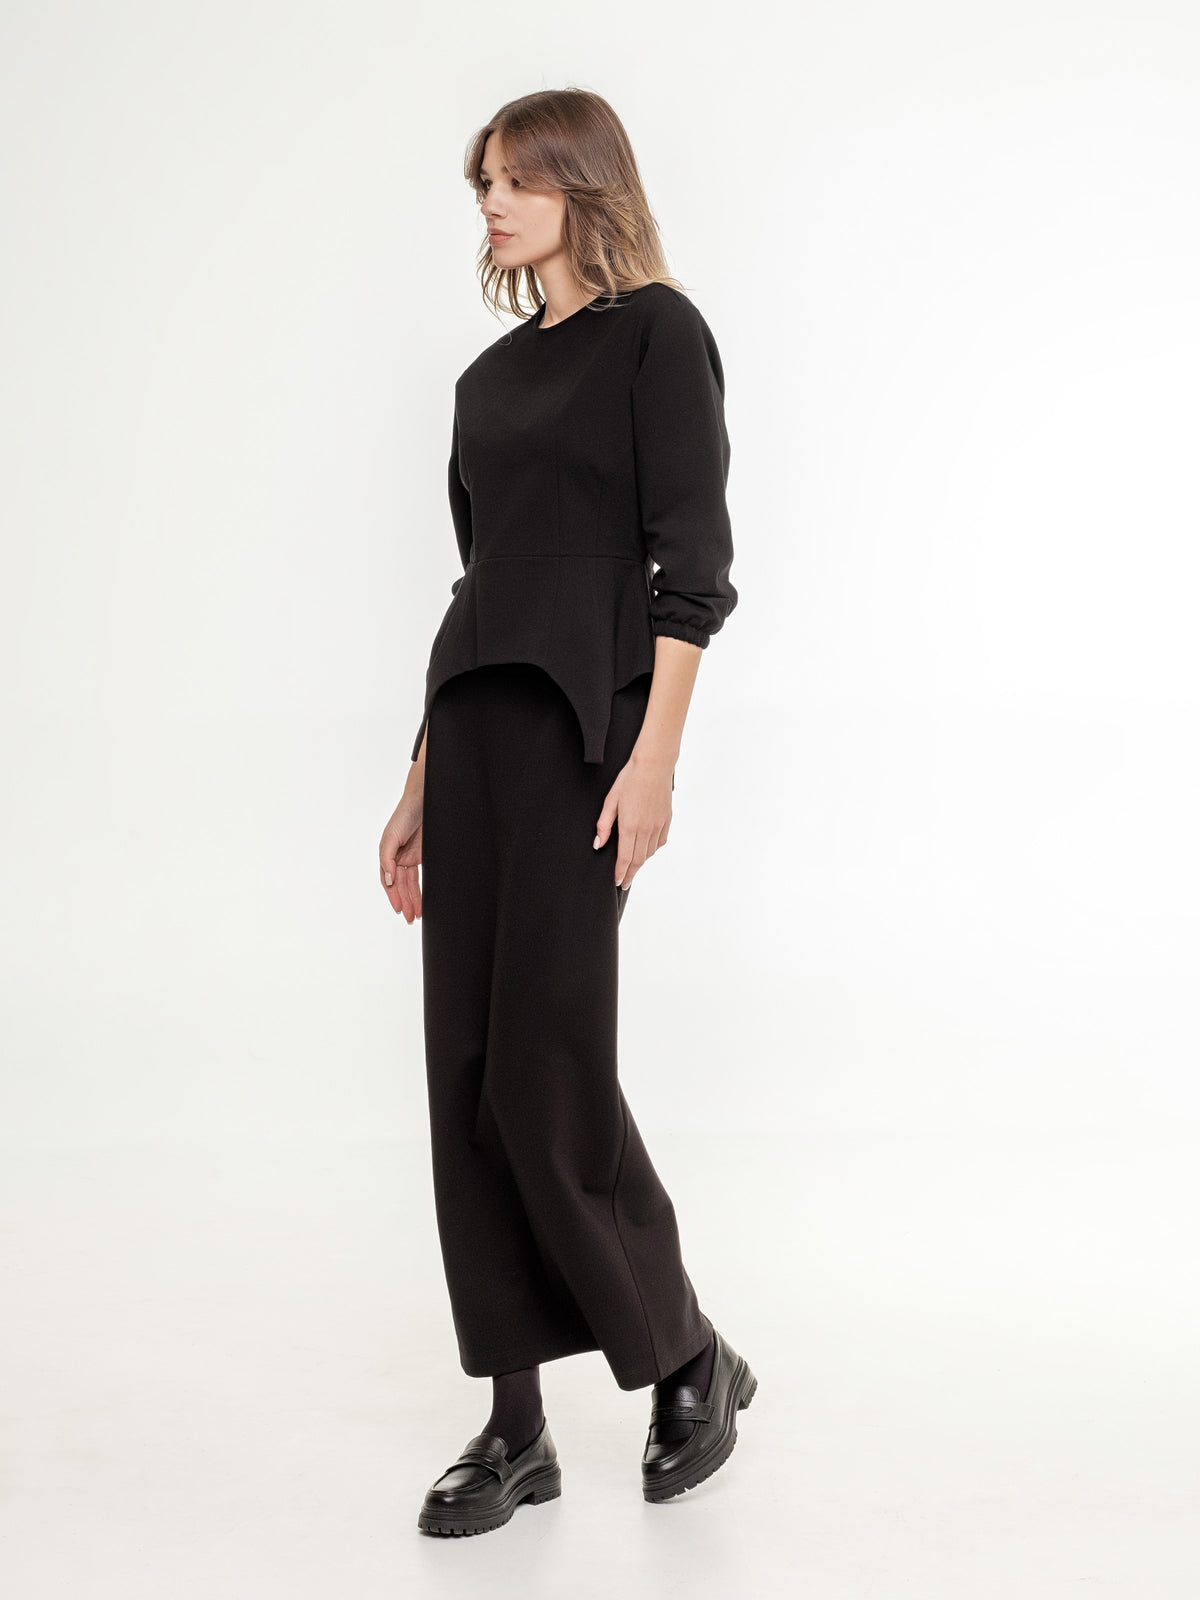 costume black top with long sleeve and long skirt side view